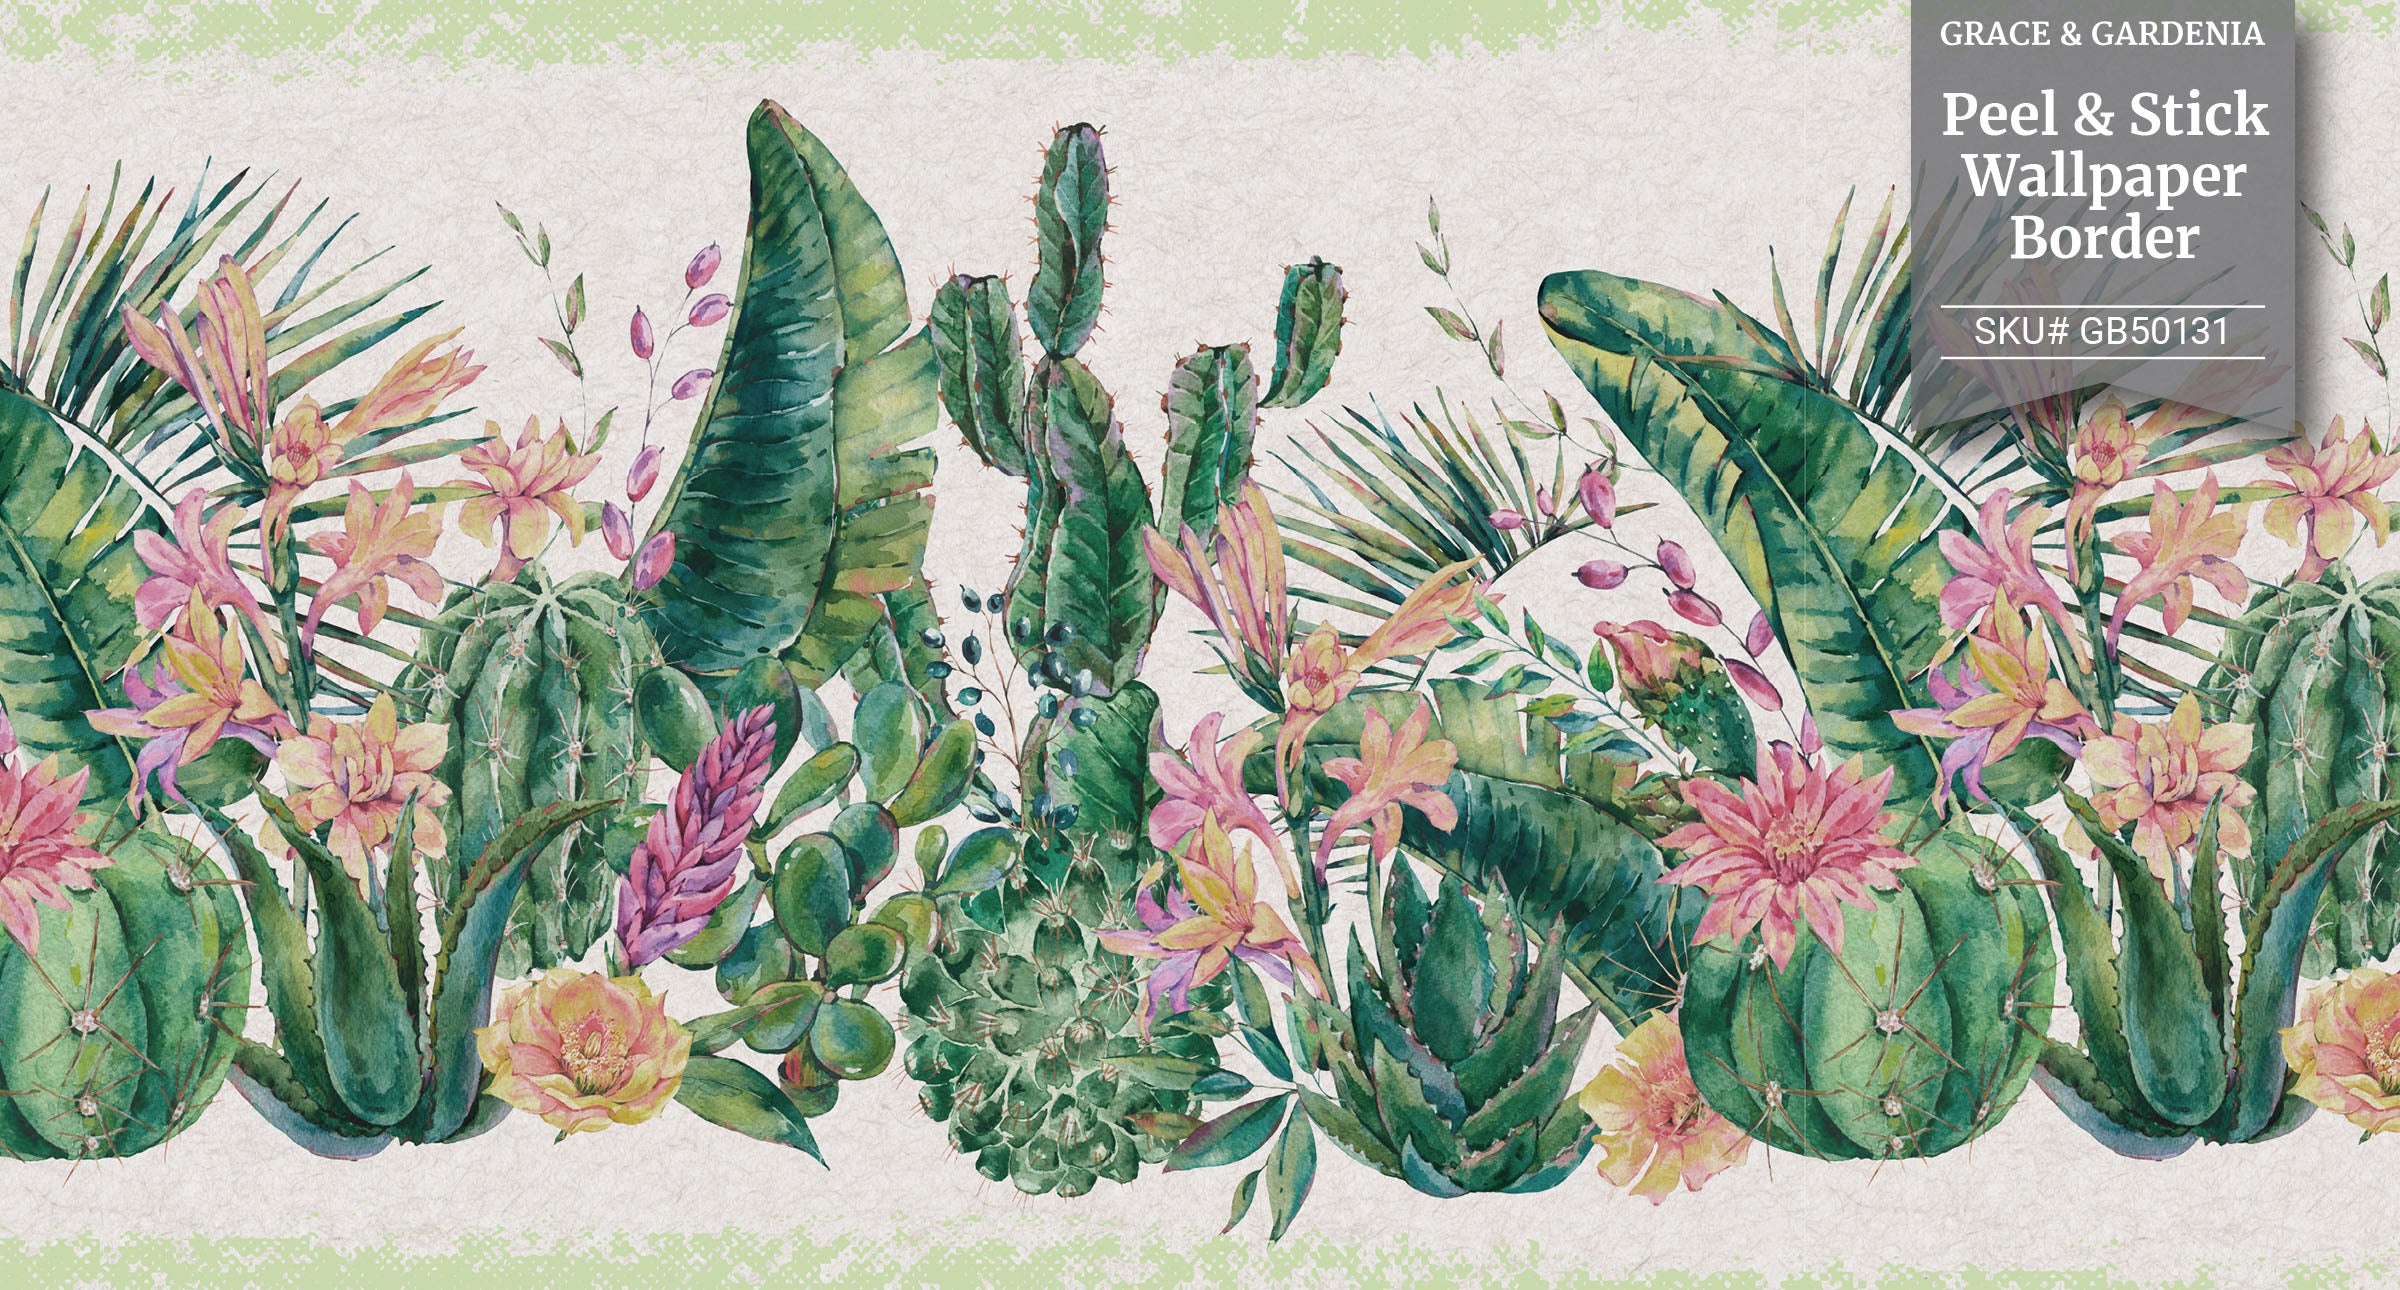 GB50131 Grace & Gardenia Cactus Flowers Peel and Stick Wallpaper Border 10in Height x 18ft Long, Green Beige Pink